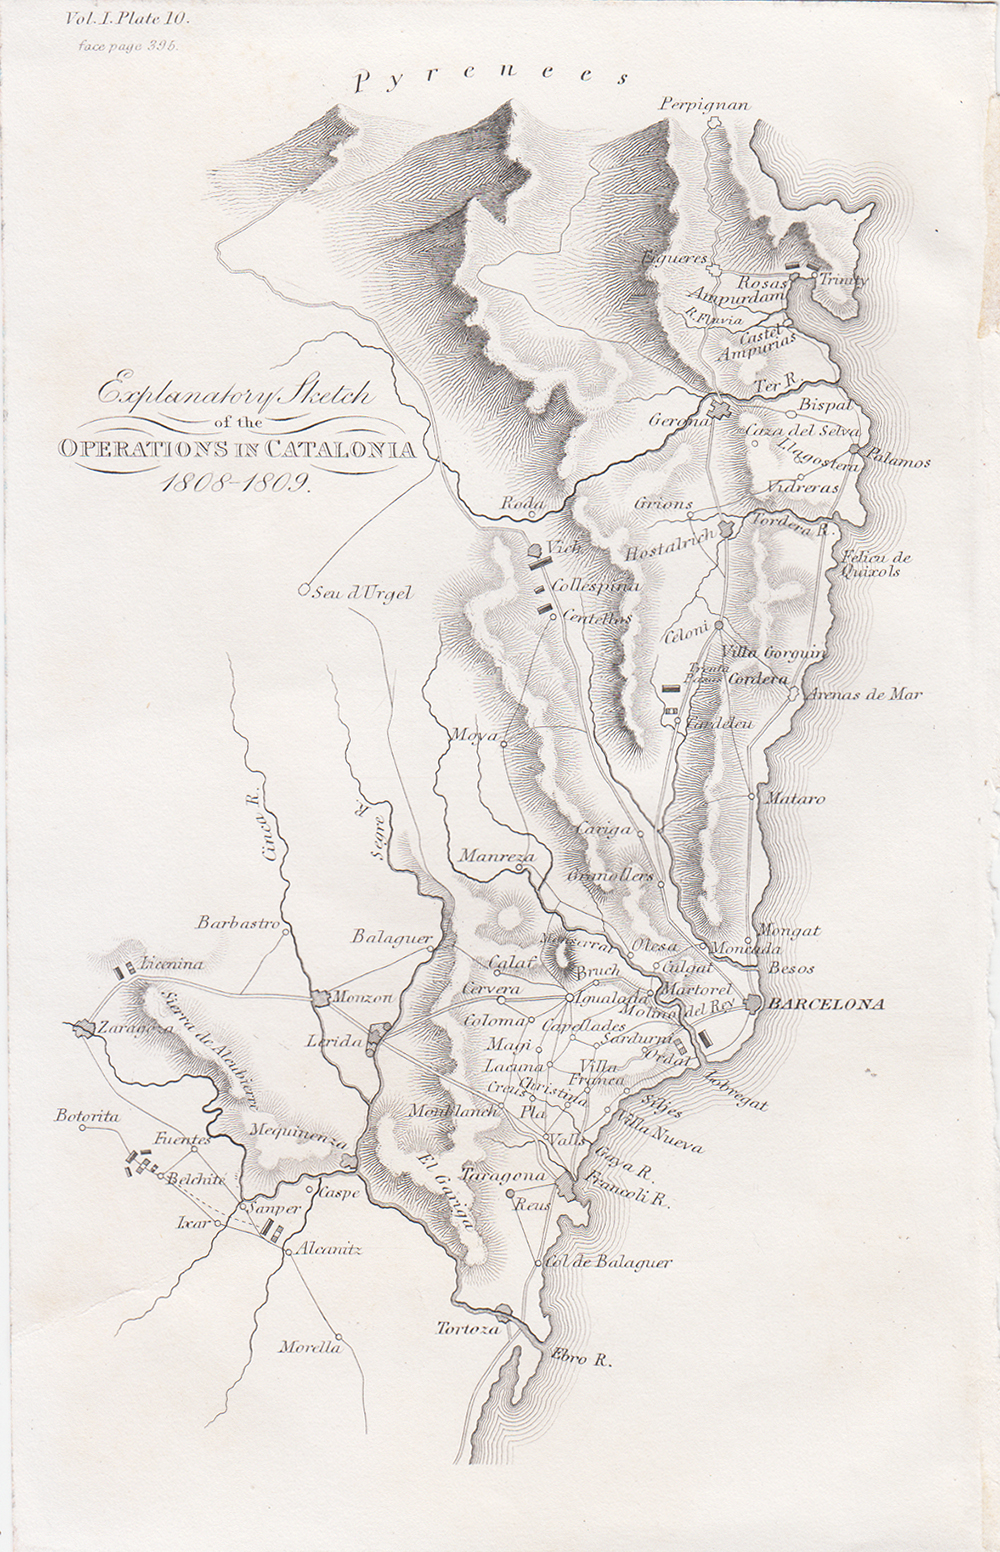 Explanatory Sketch of the Operations in Catalonia 1809-1809